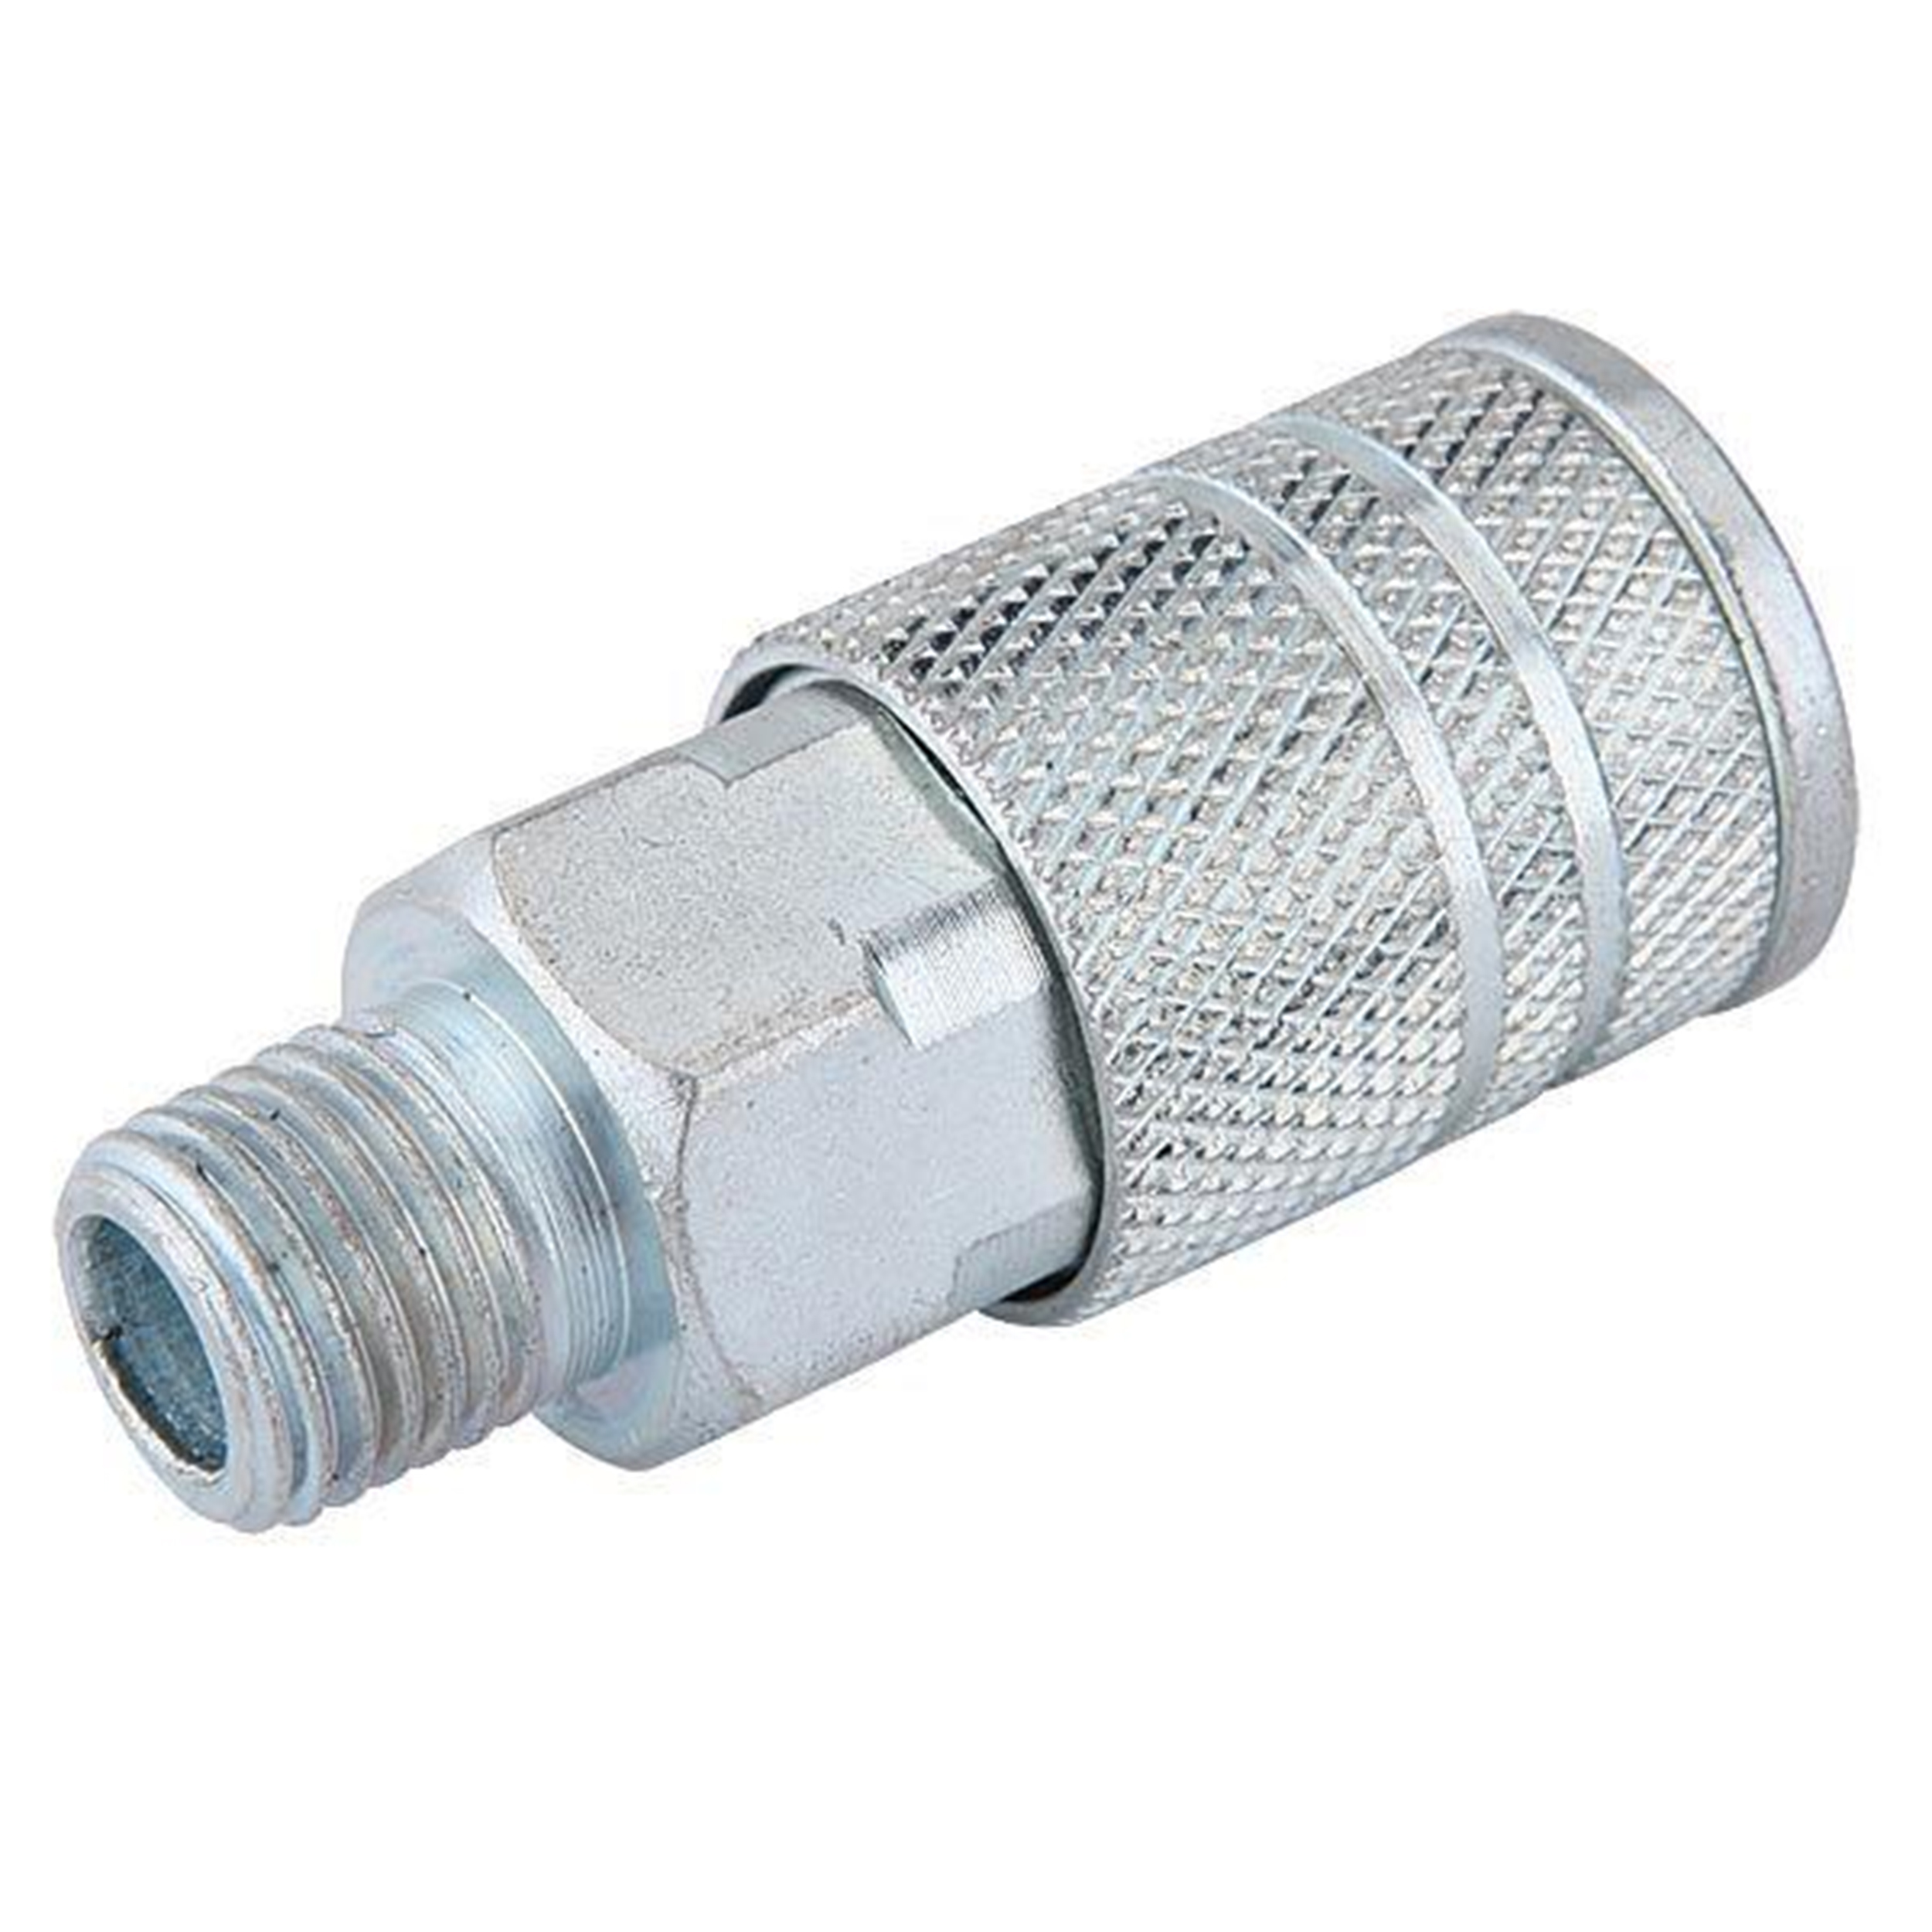 1/4-inch Industrial Air Coupler With Male 1/4-inch Npt